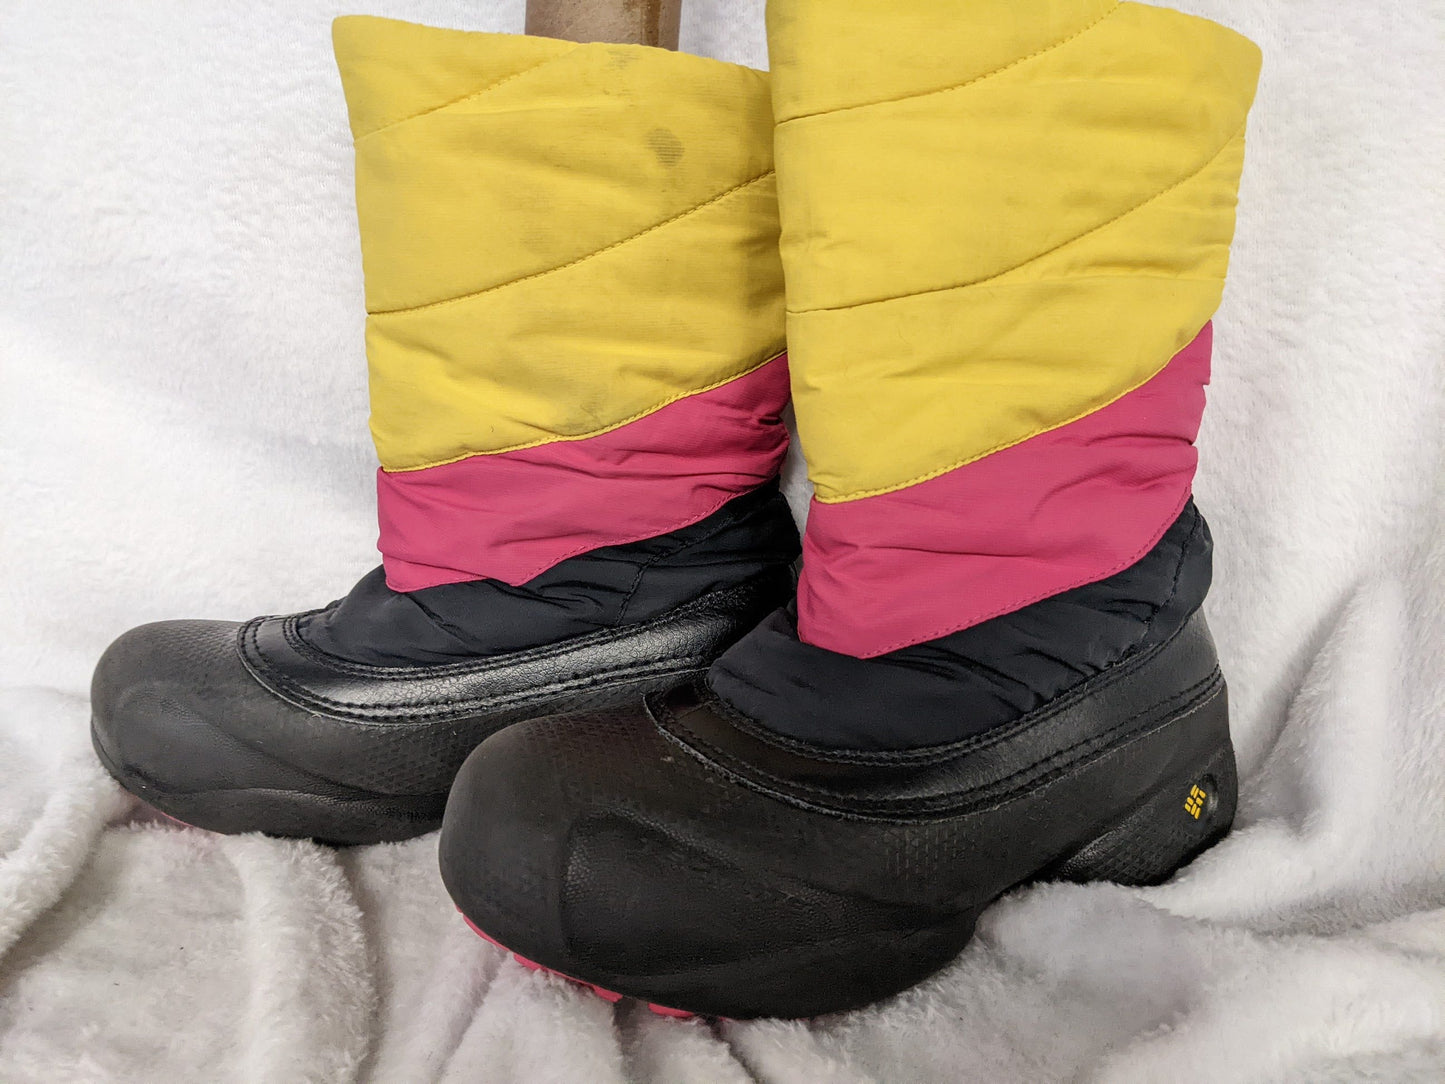 Columbia Snow Boots Size 3 Color Yellow Condition Used